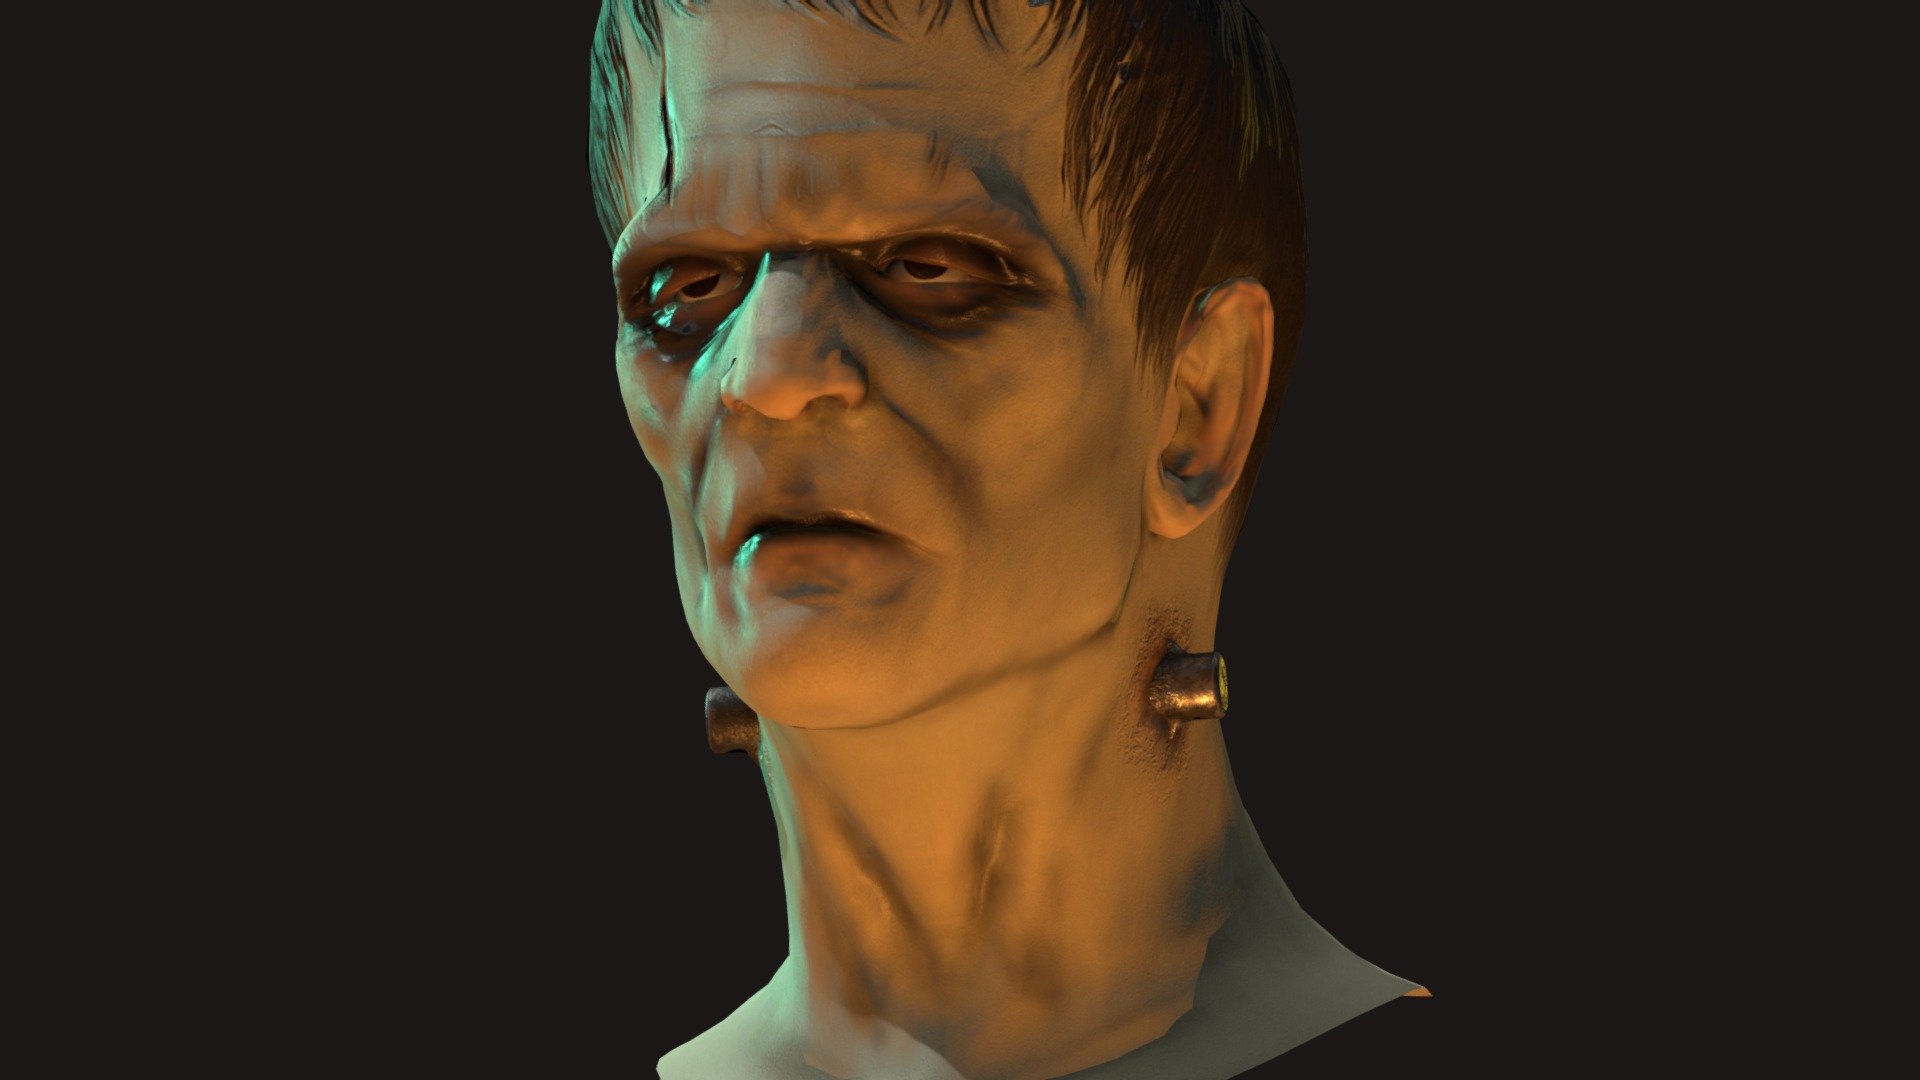 My attempt at a realistic, likeness bust of Boris Karloff as the Monster in 1931 Frankenstein. Focused on capturing the likeness of him while wearing the iconic Monster makeup. This bust was sculpted in ZBrush, retopolgized/UVs in Maya 2022, and finally textured in Substance Painter 3d model